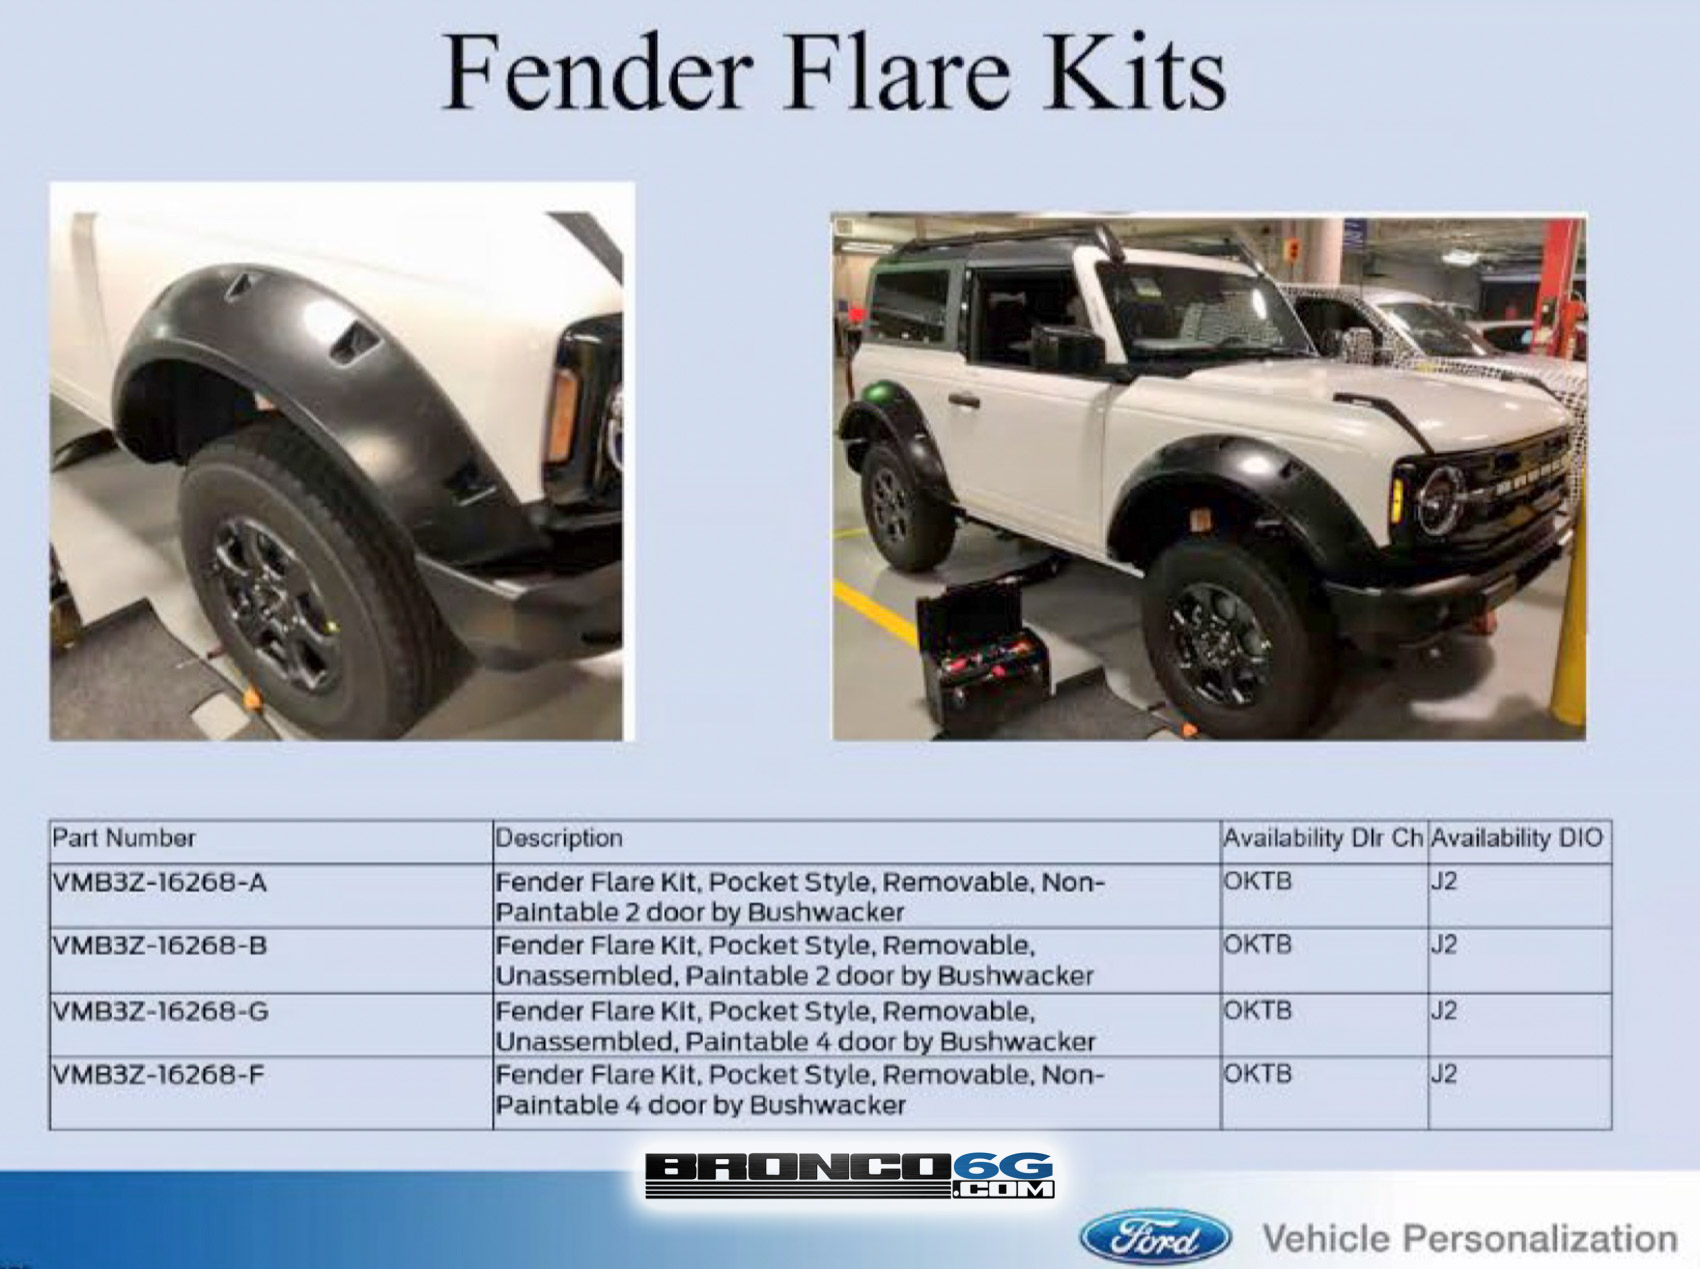 Ford Bronco ⚙️ 2021 BRONCO ACCESSORIES PICTURES! Ford Performance Parts Catalog + Availability Schedule ? 2021 Bronco Fender Flare Kits Bushwacker Pocket Style - Ford Performance OEM factory accessory